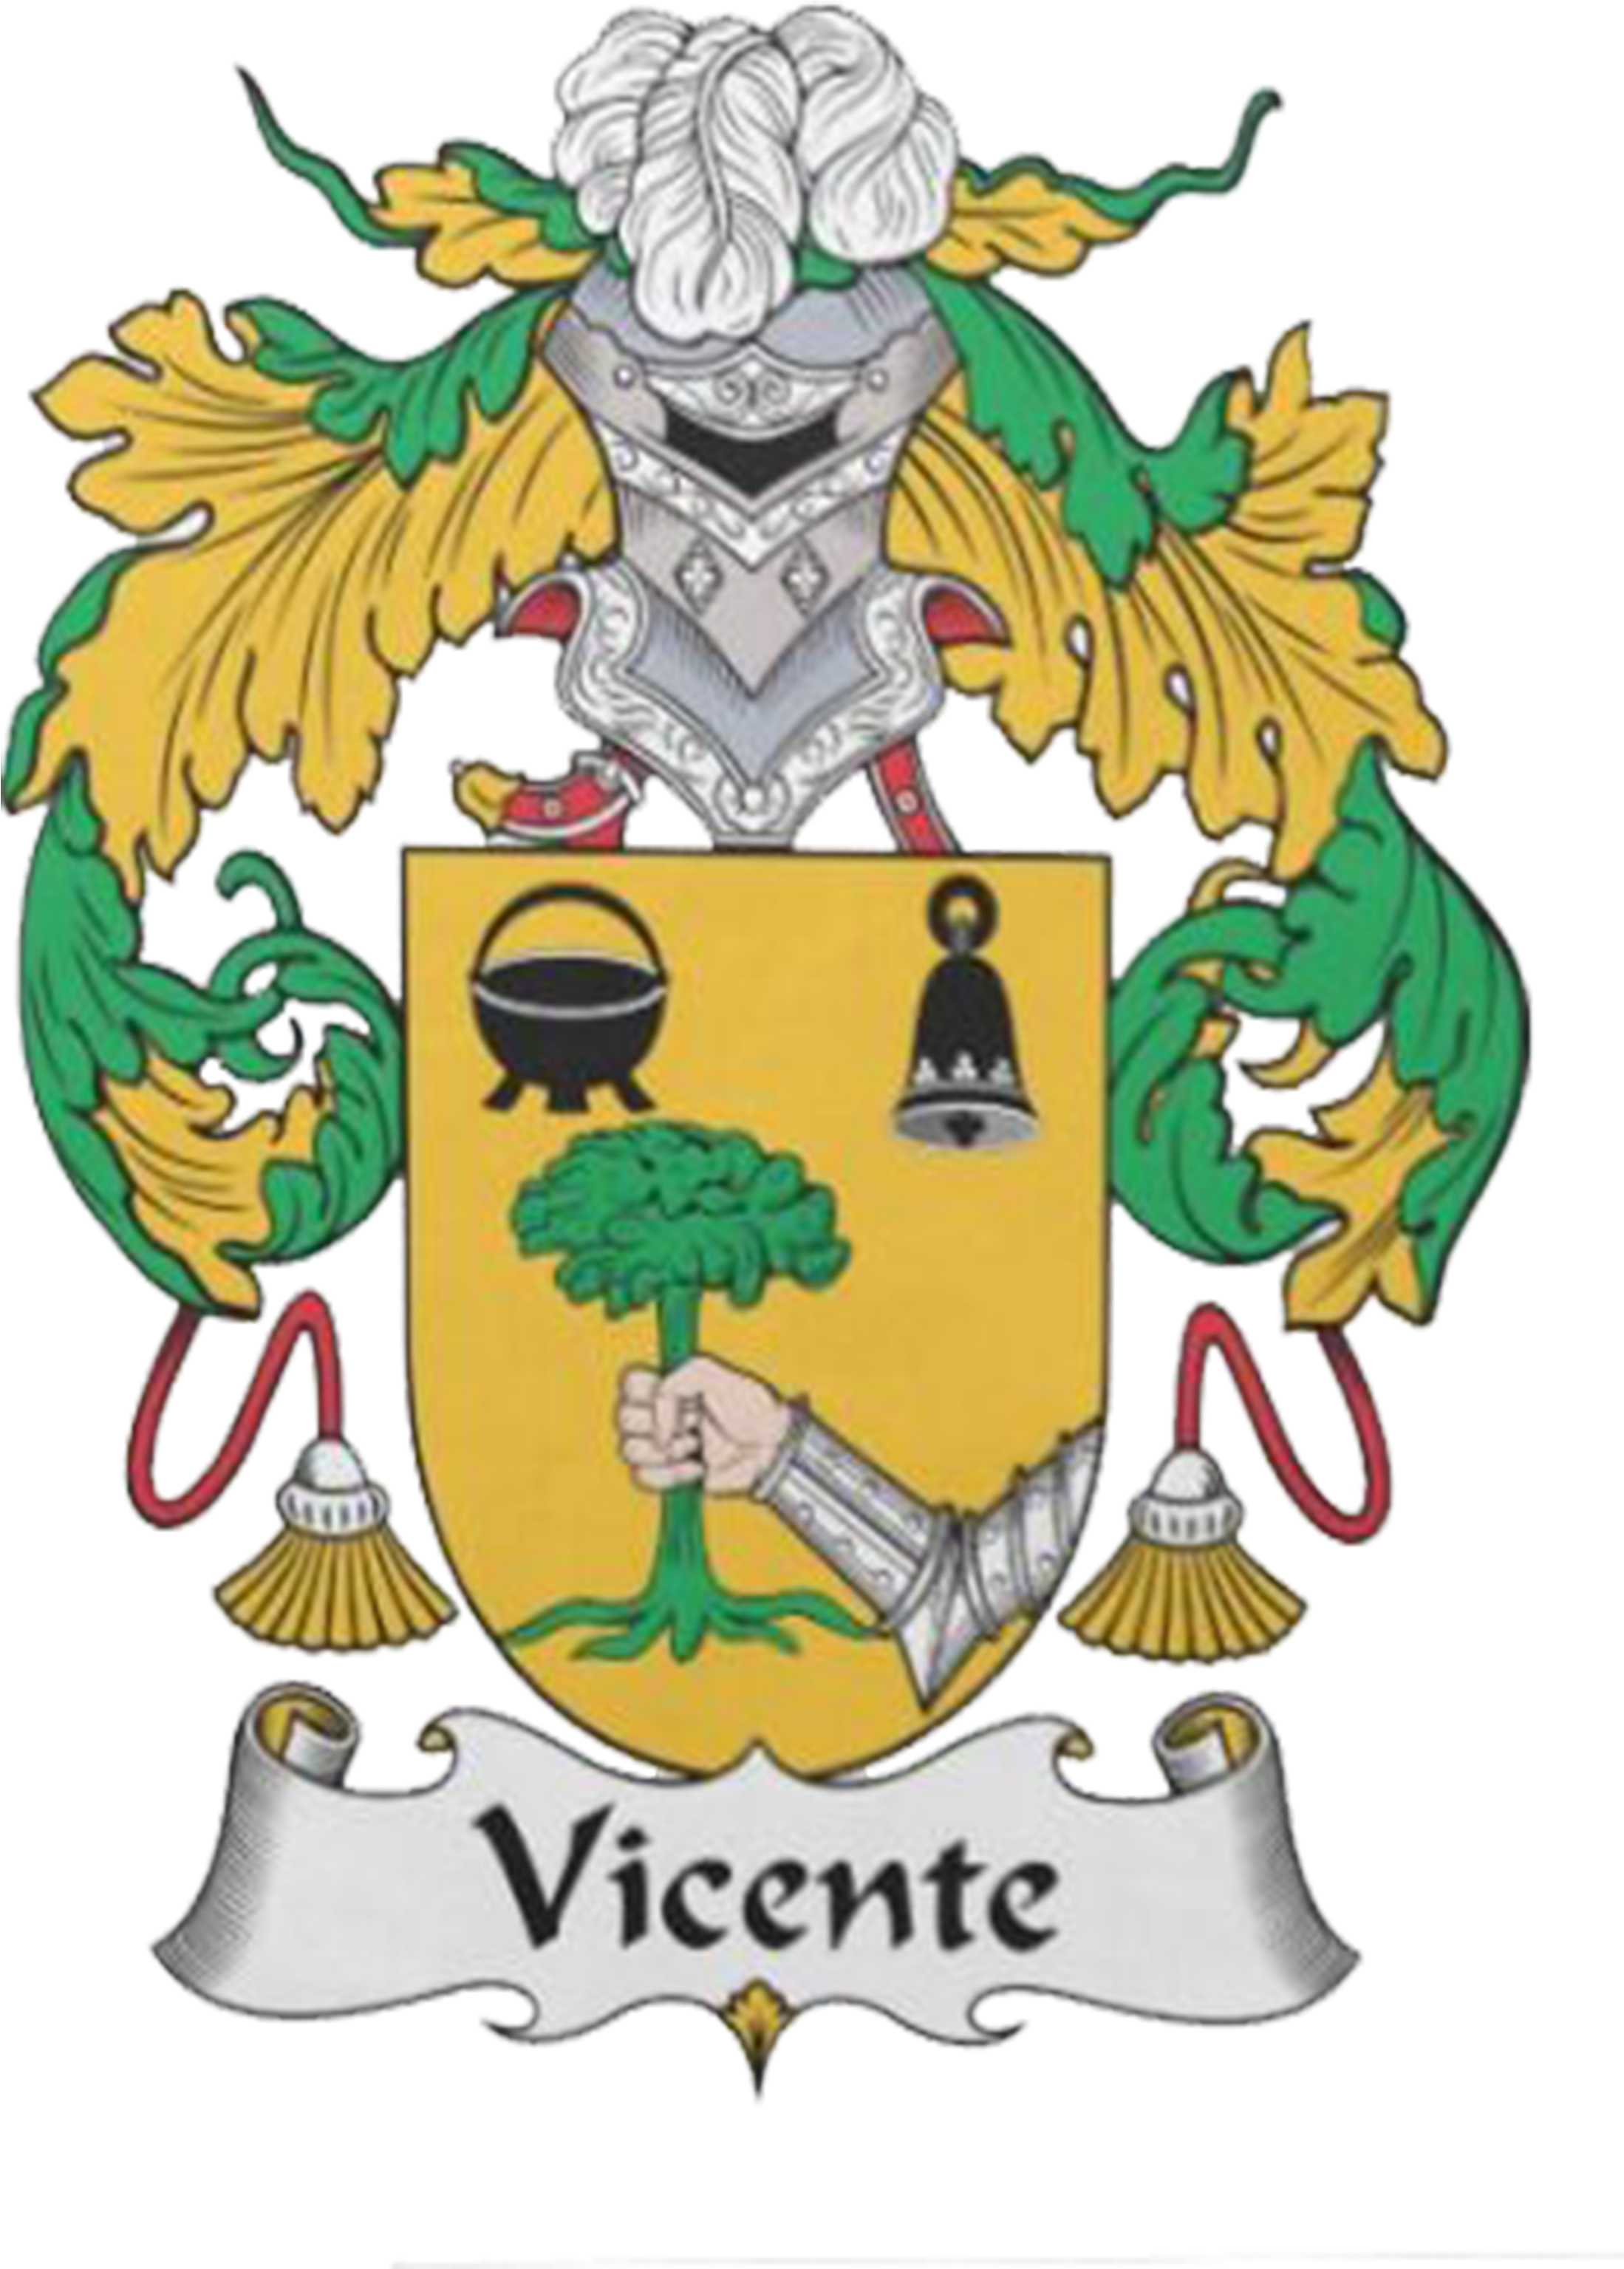 Vicente Family Crest Jewelry, Rings, Pendants And Cufflinks - Vicente Family Crest (2480x3508)